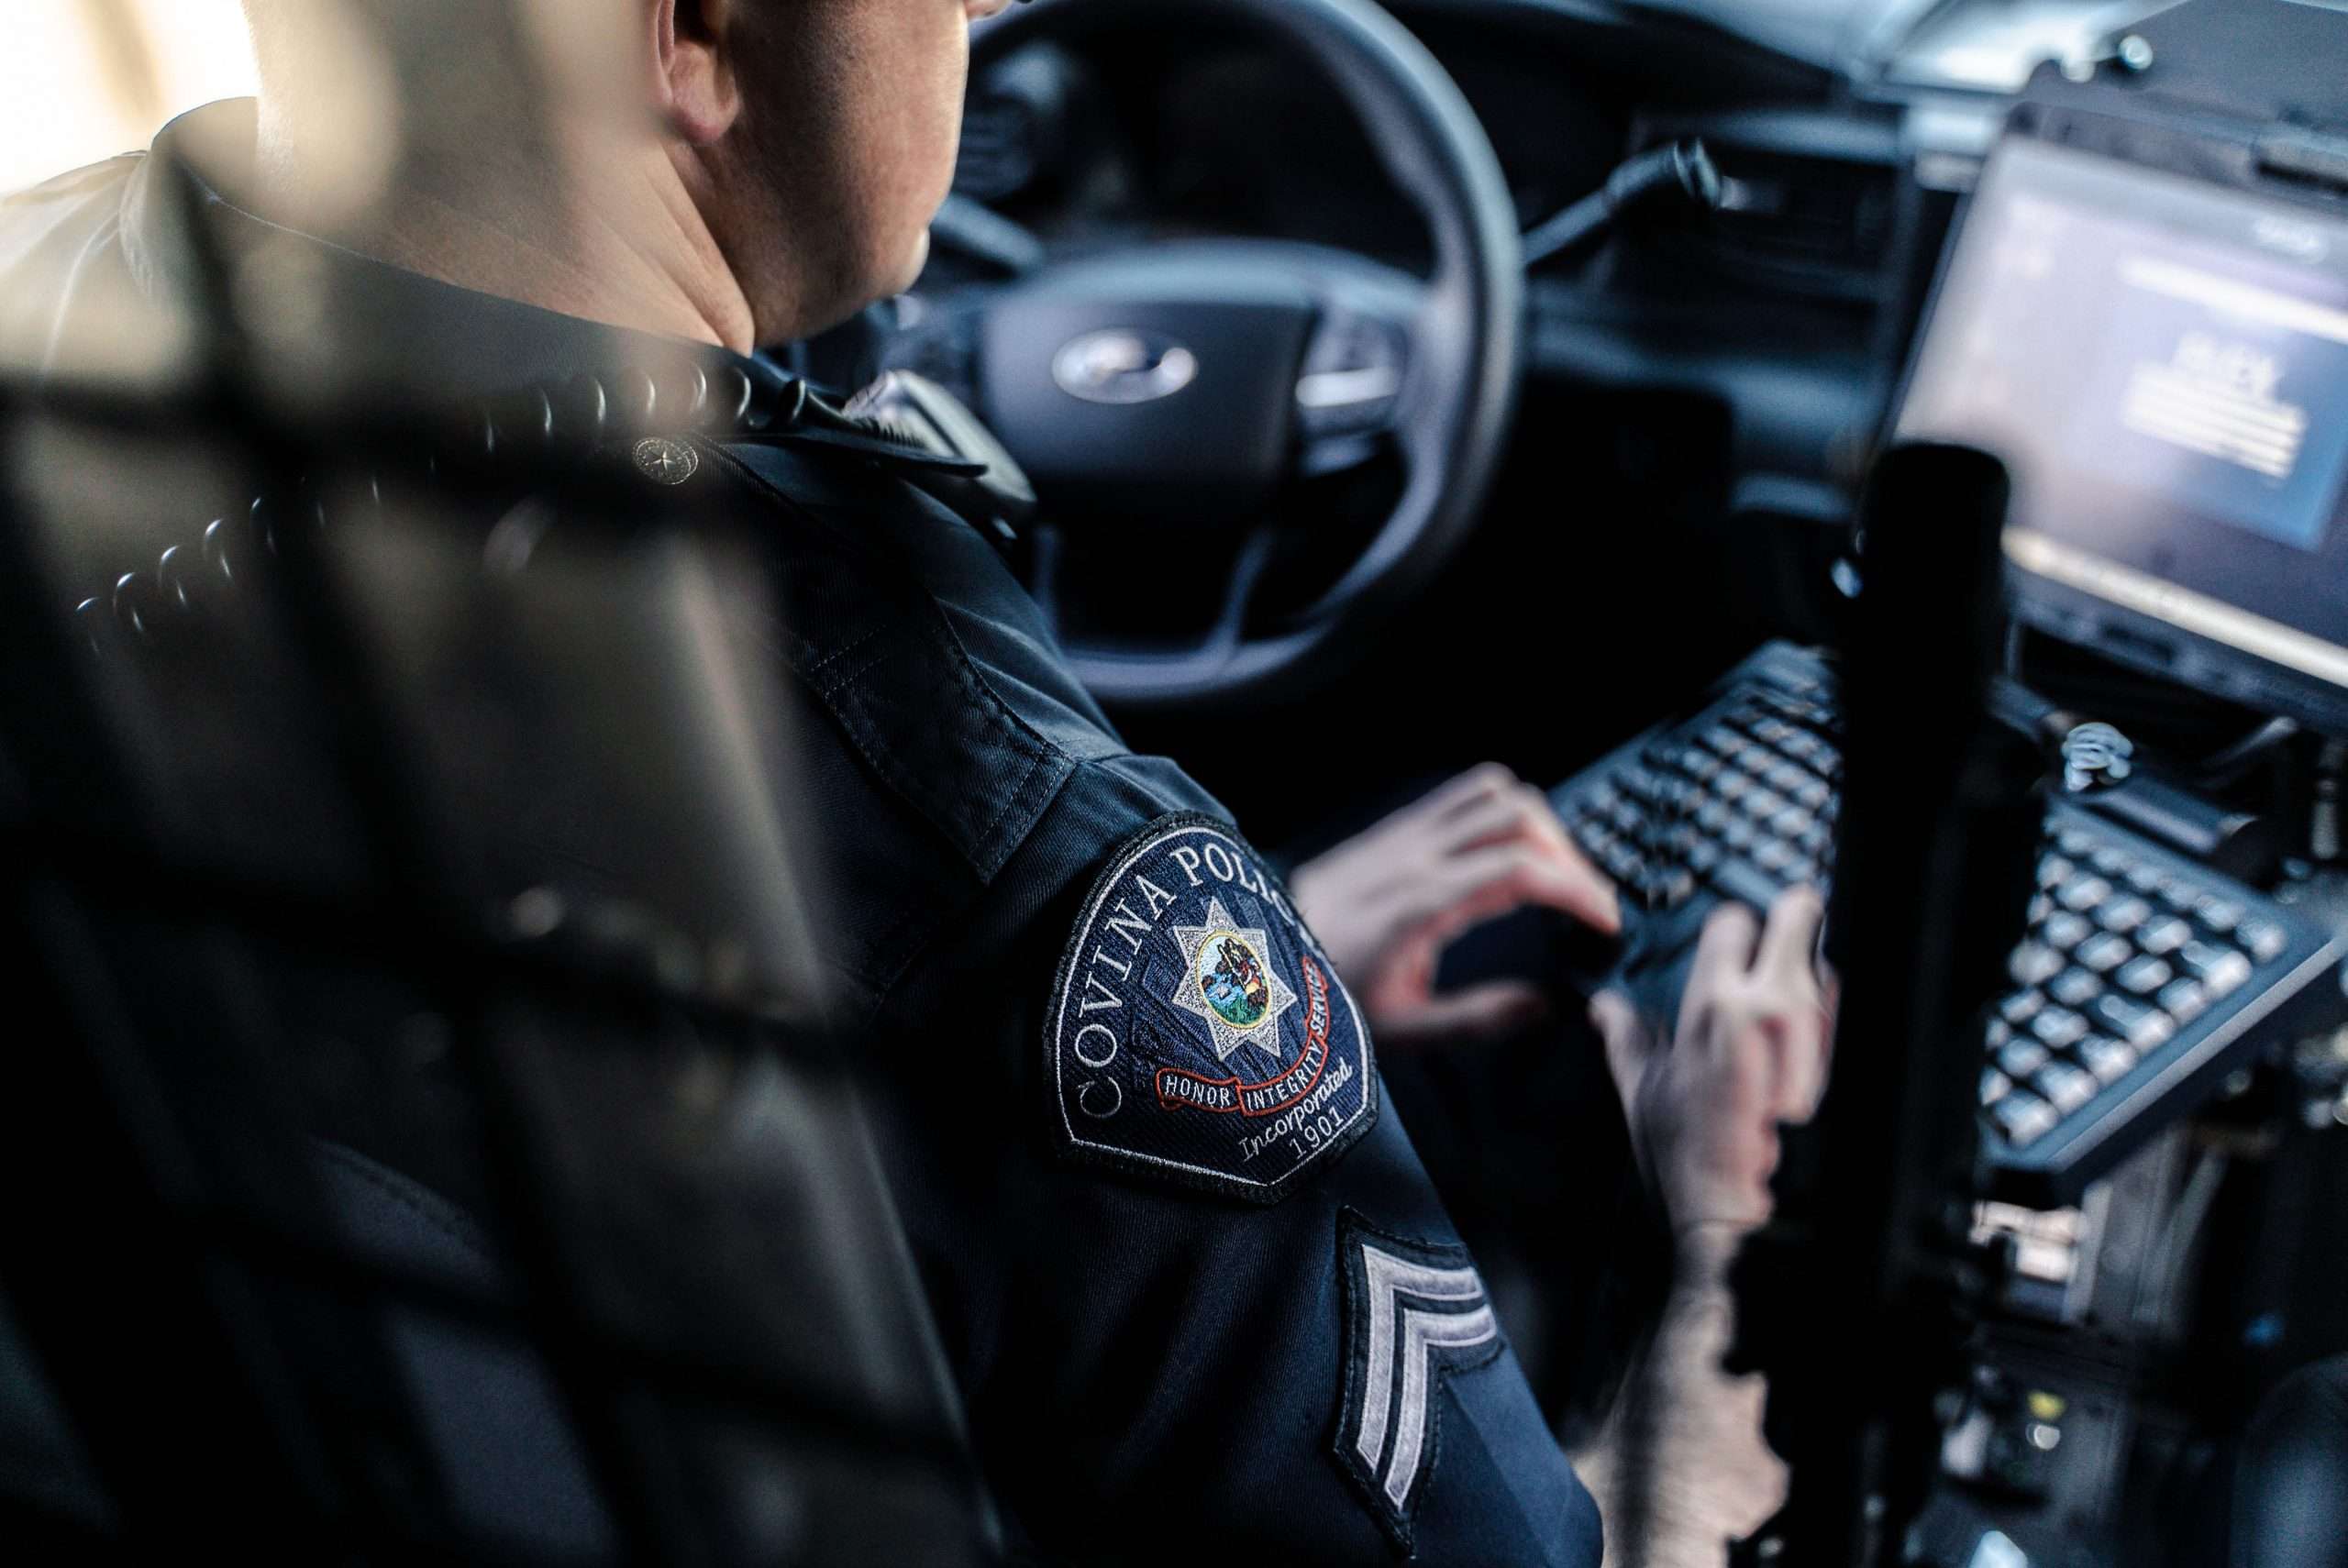 A Covina Police Officer uses his mobile computer in his patrol vehicle